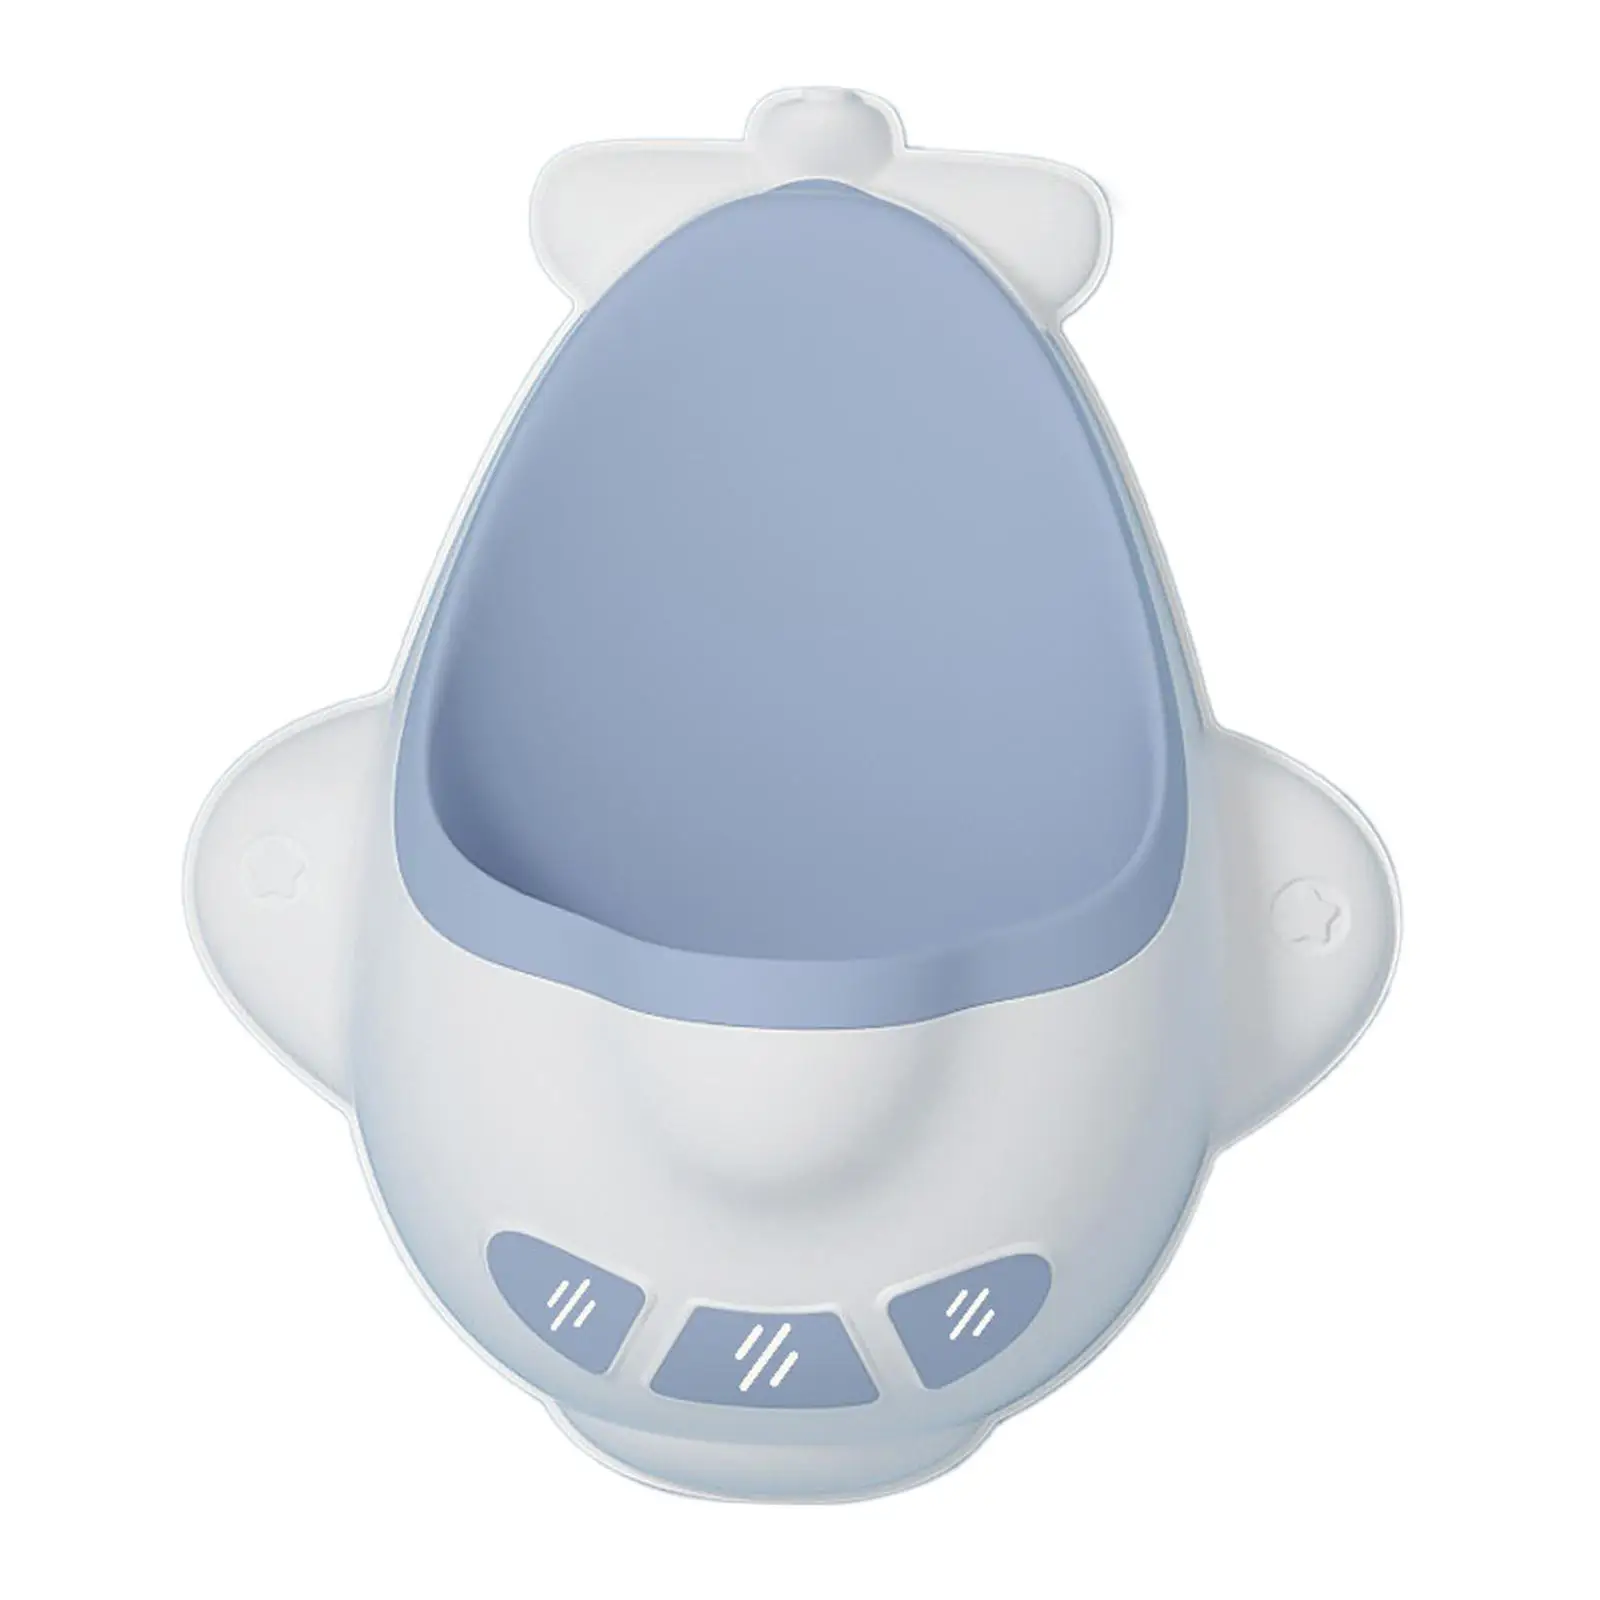 Boys Urinal Potty with Removable Bowl Insert Quick Cleaning